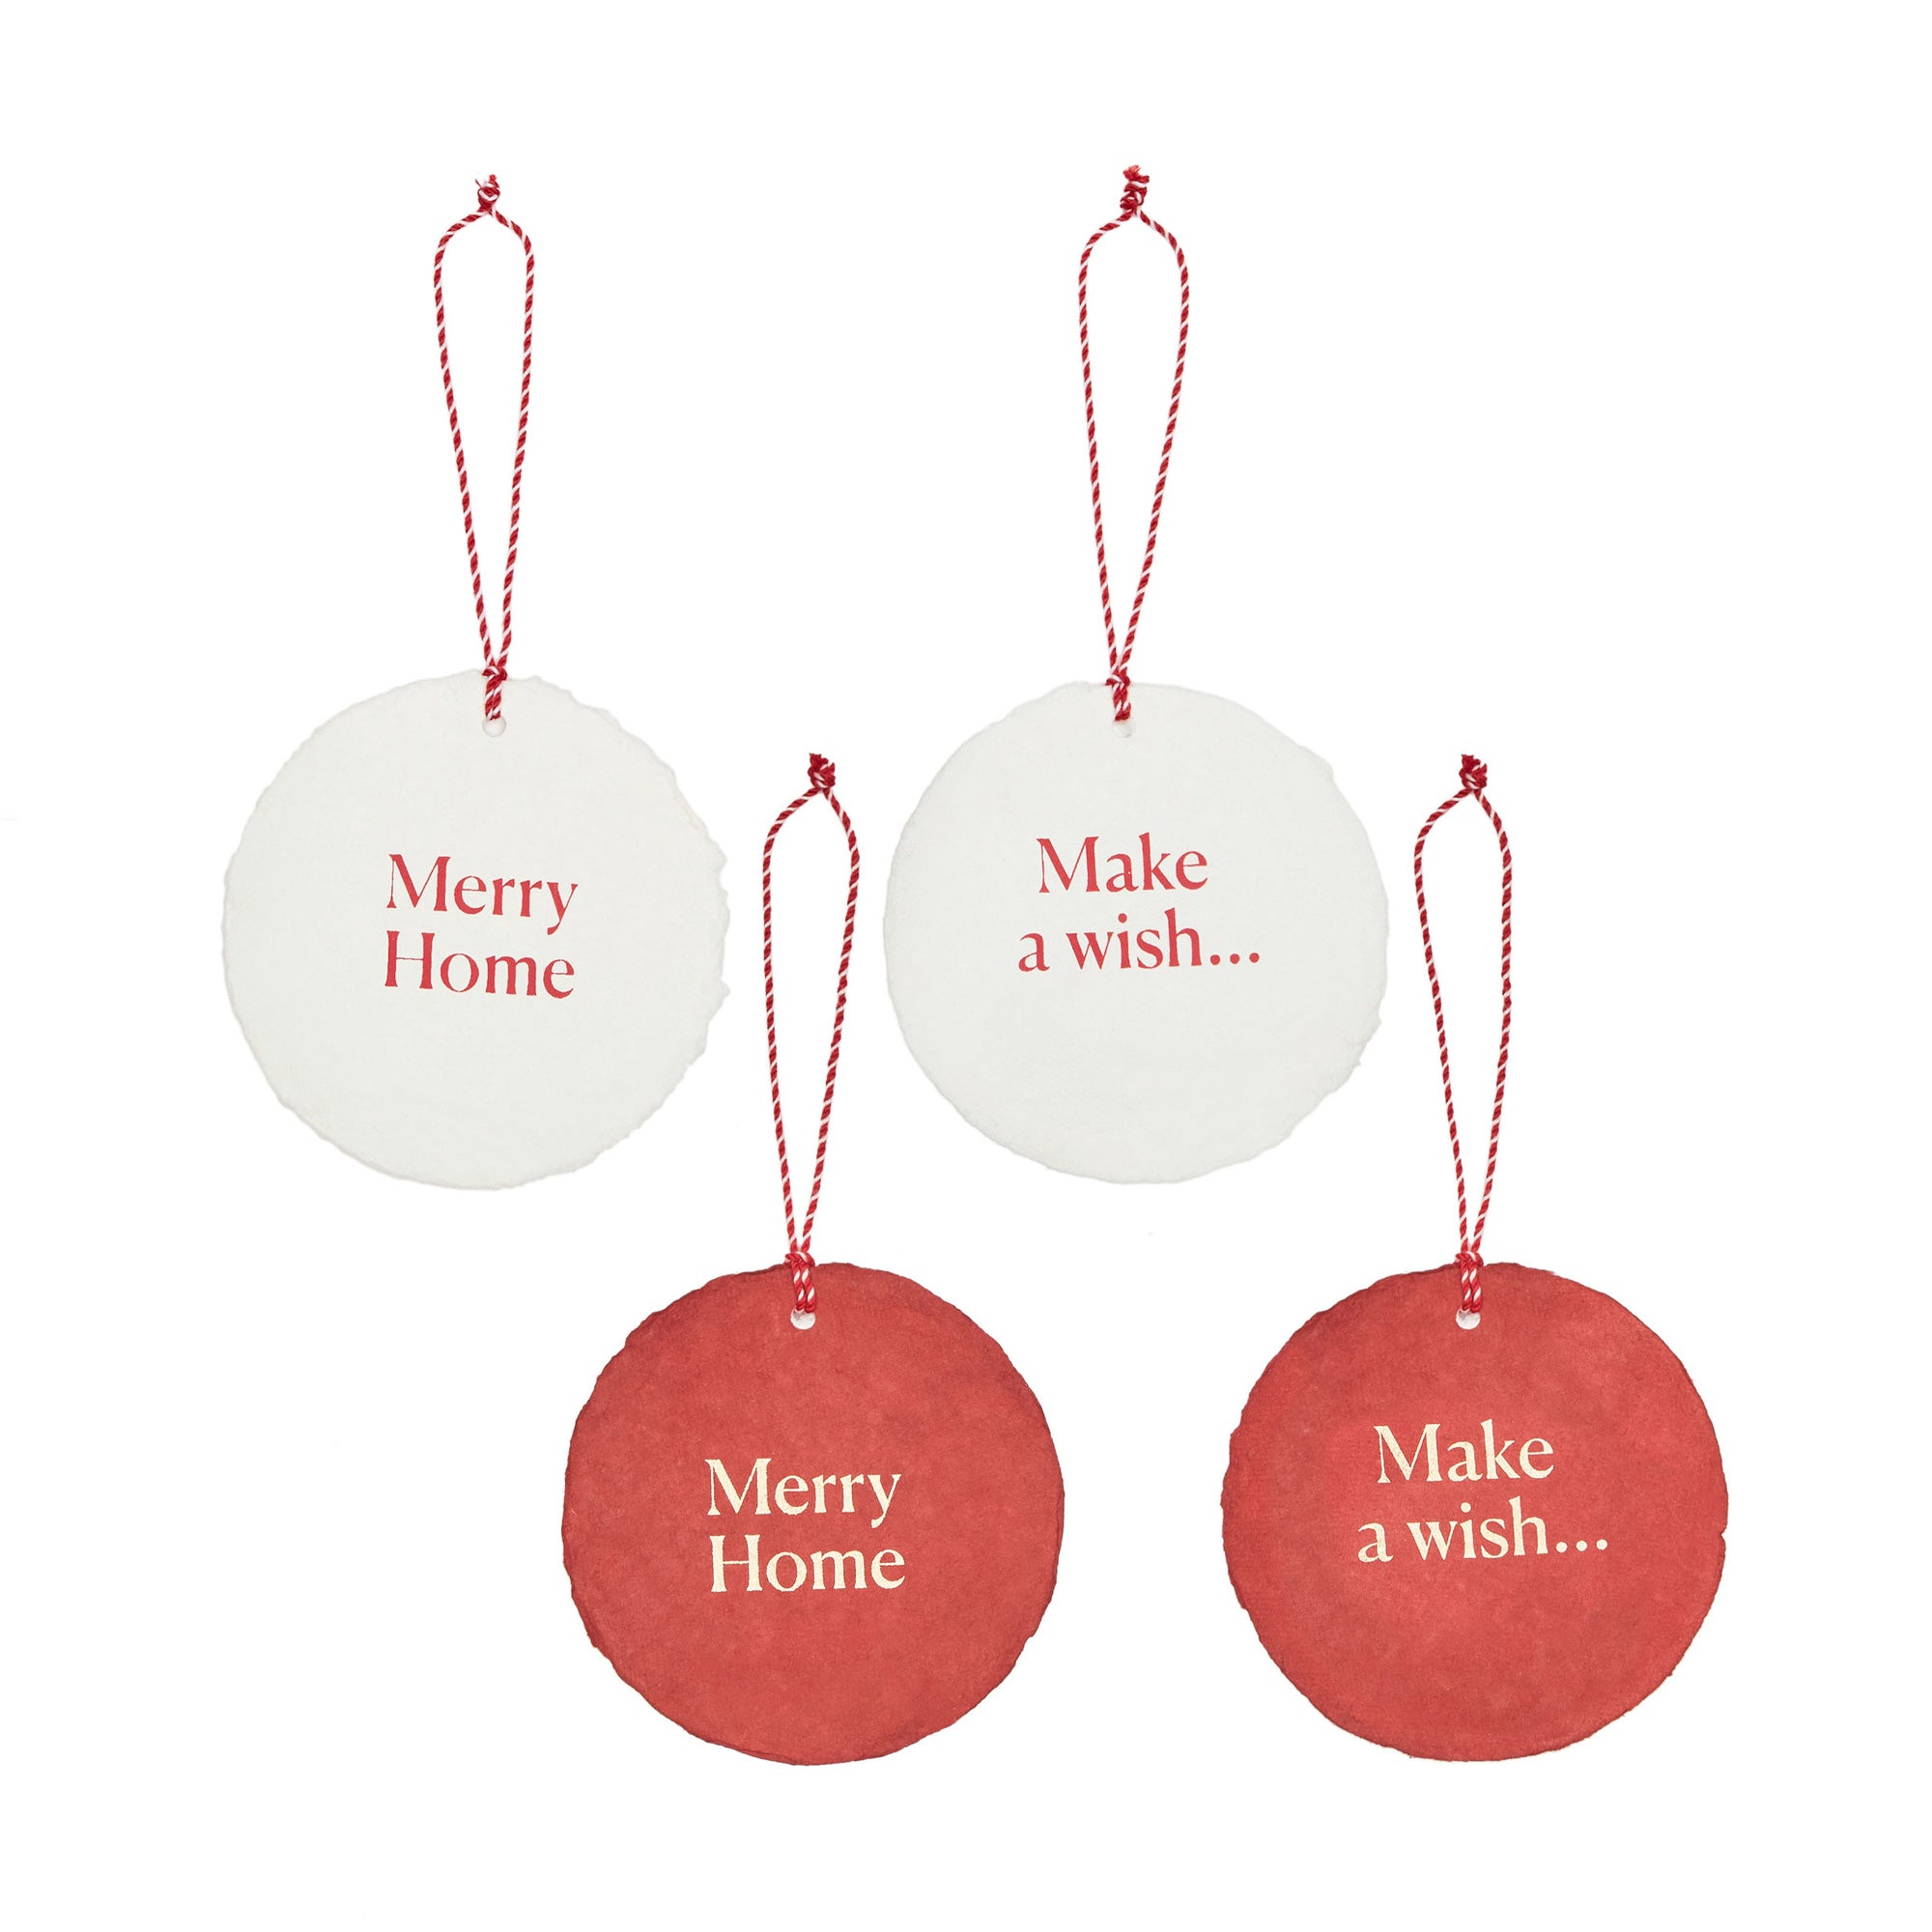 Nathaniel set of 4 hanging baubles in white and red paper